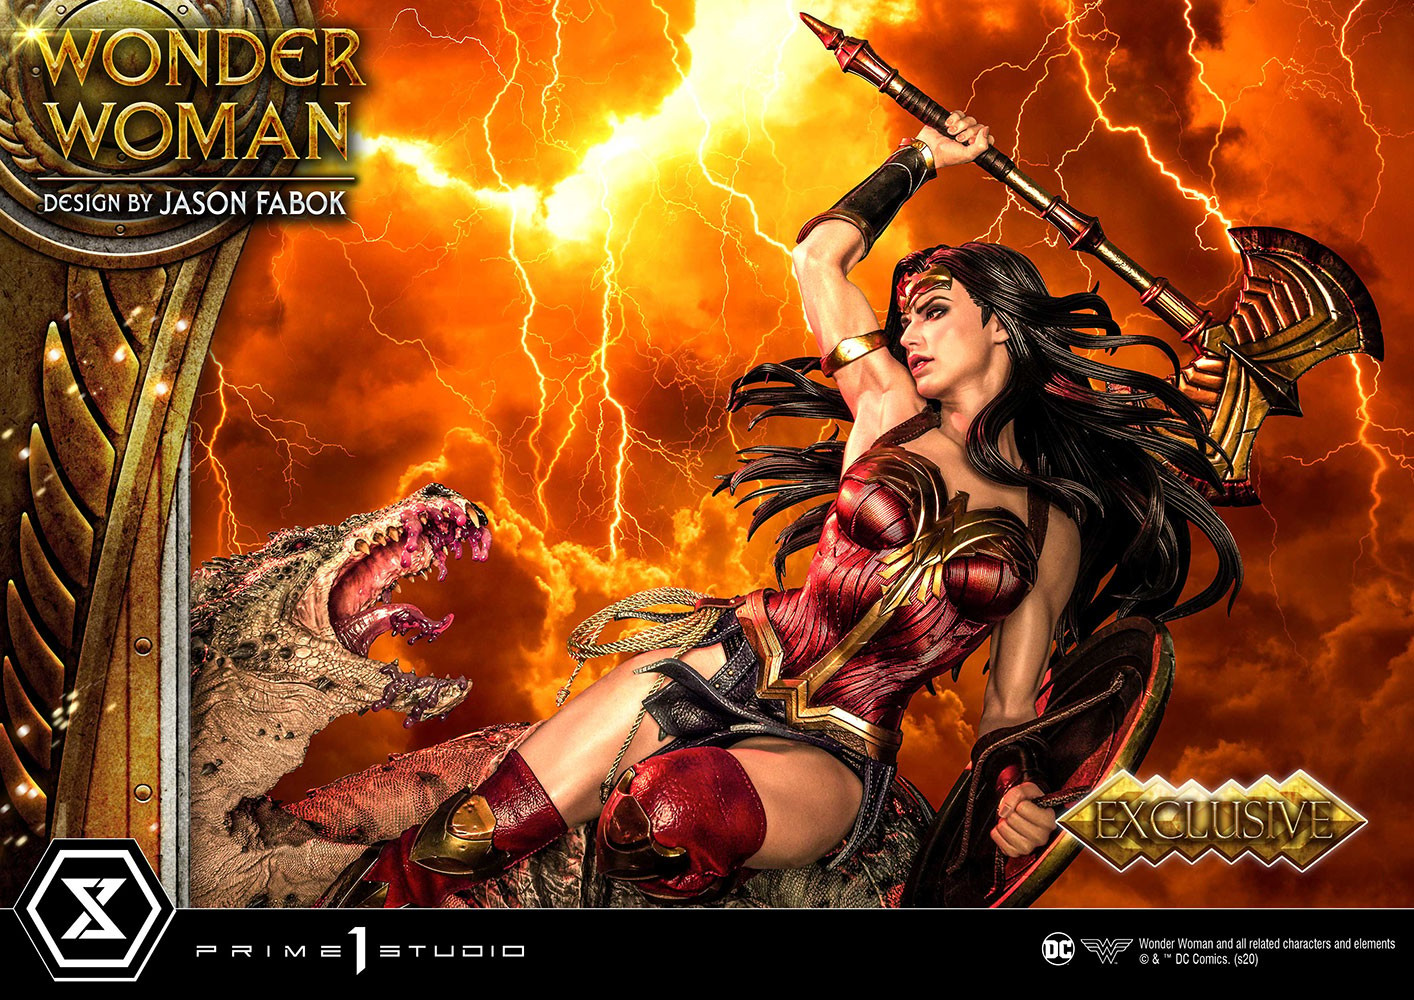 Wonder Woman VS Hydra Exclusive Edition (Prototype Shown) View 7